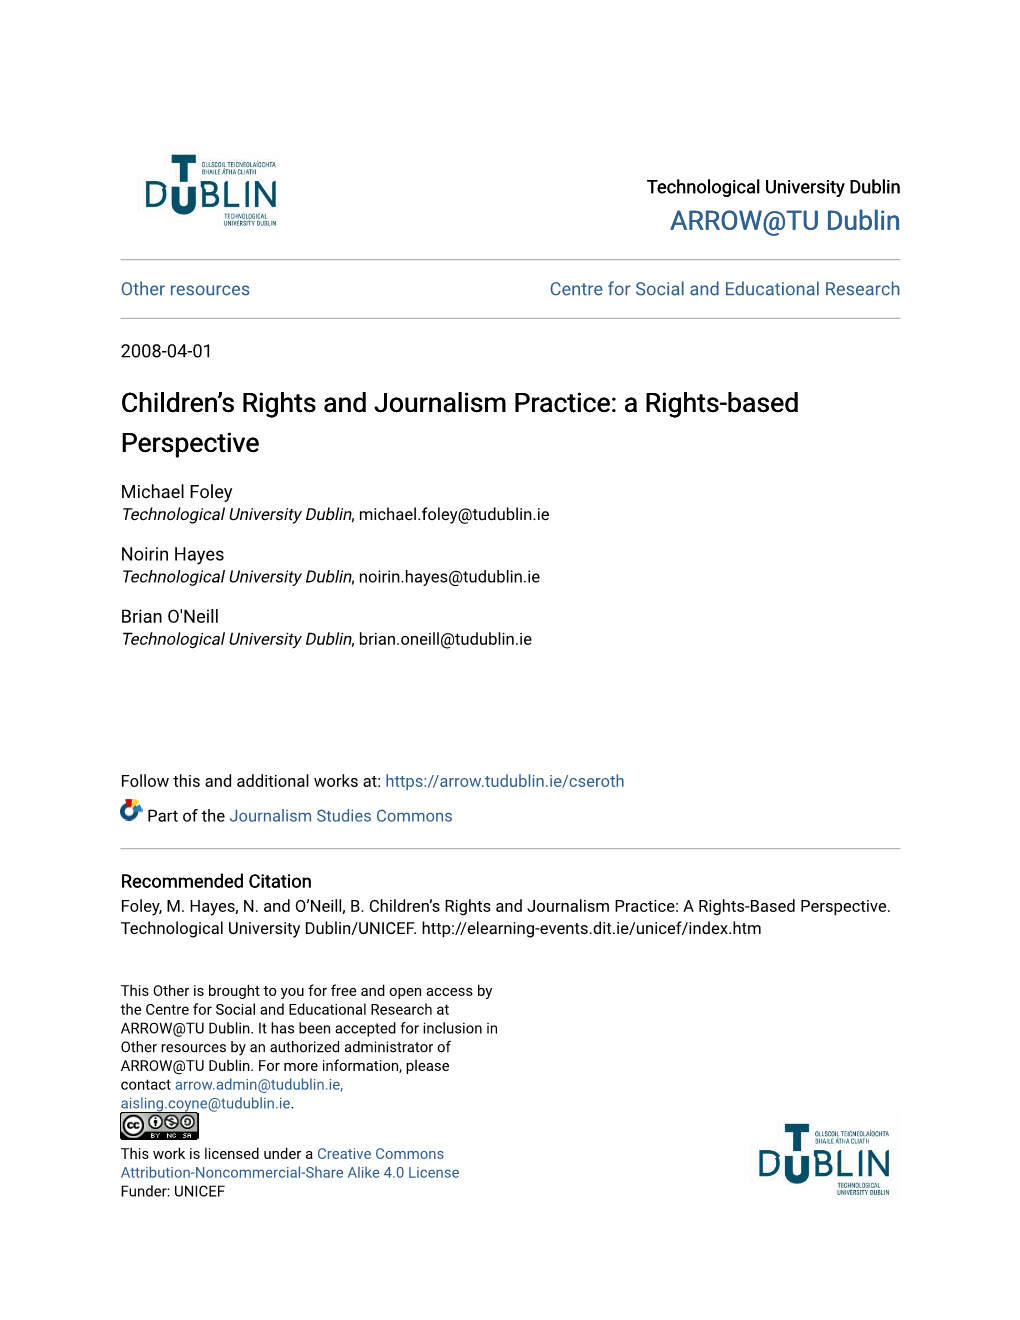 Children's Rights and Journalism Practice: a Rights-Based Perspective